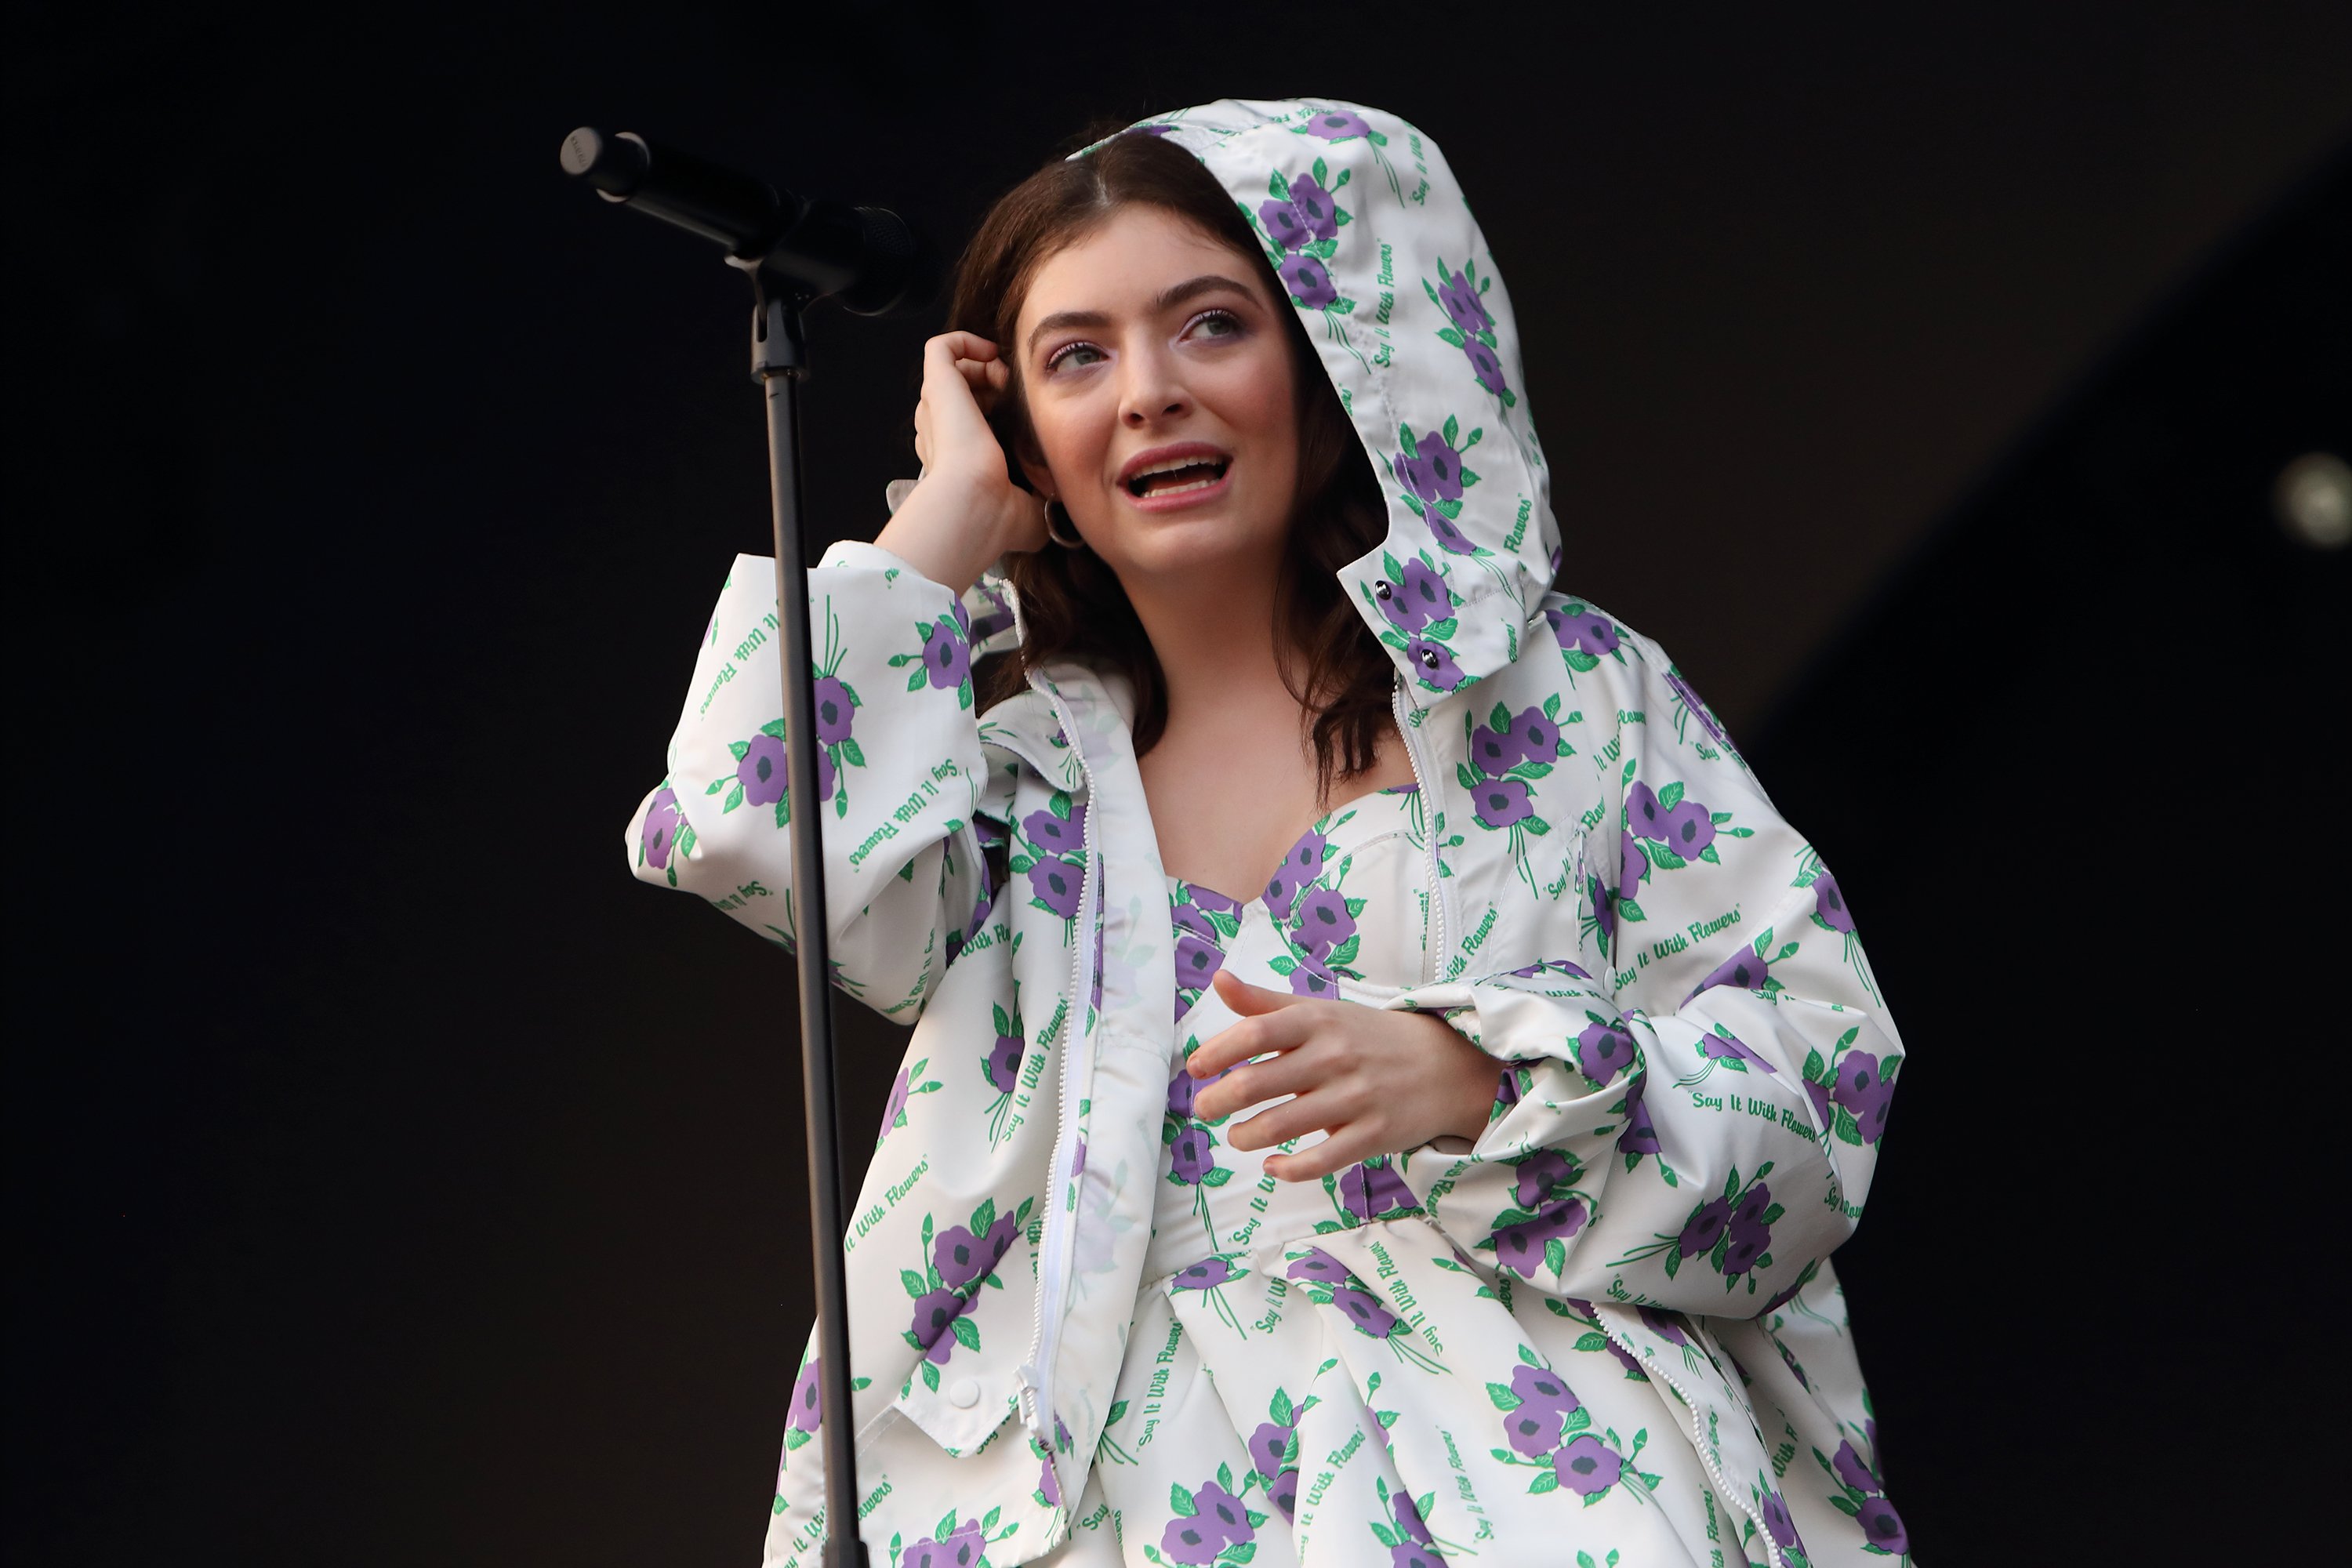 Lorde performs on stage at All Points East Festival on May 26, 2018 in London, England. | Photo: Getty Images